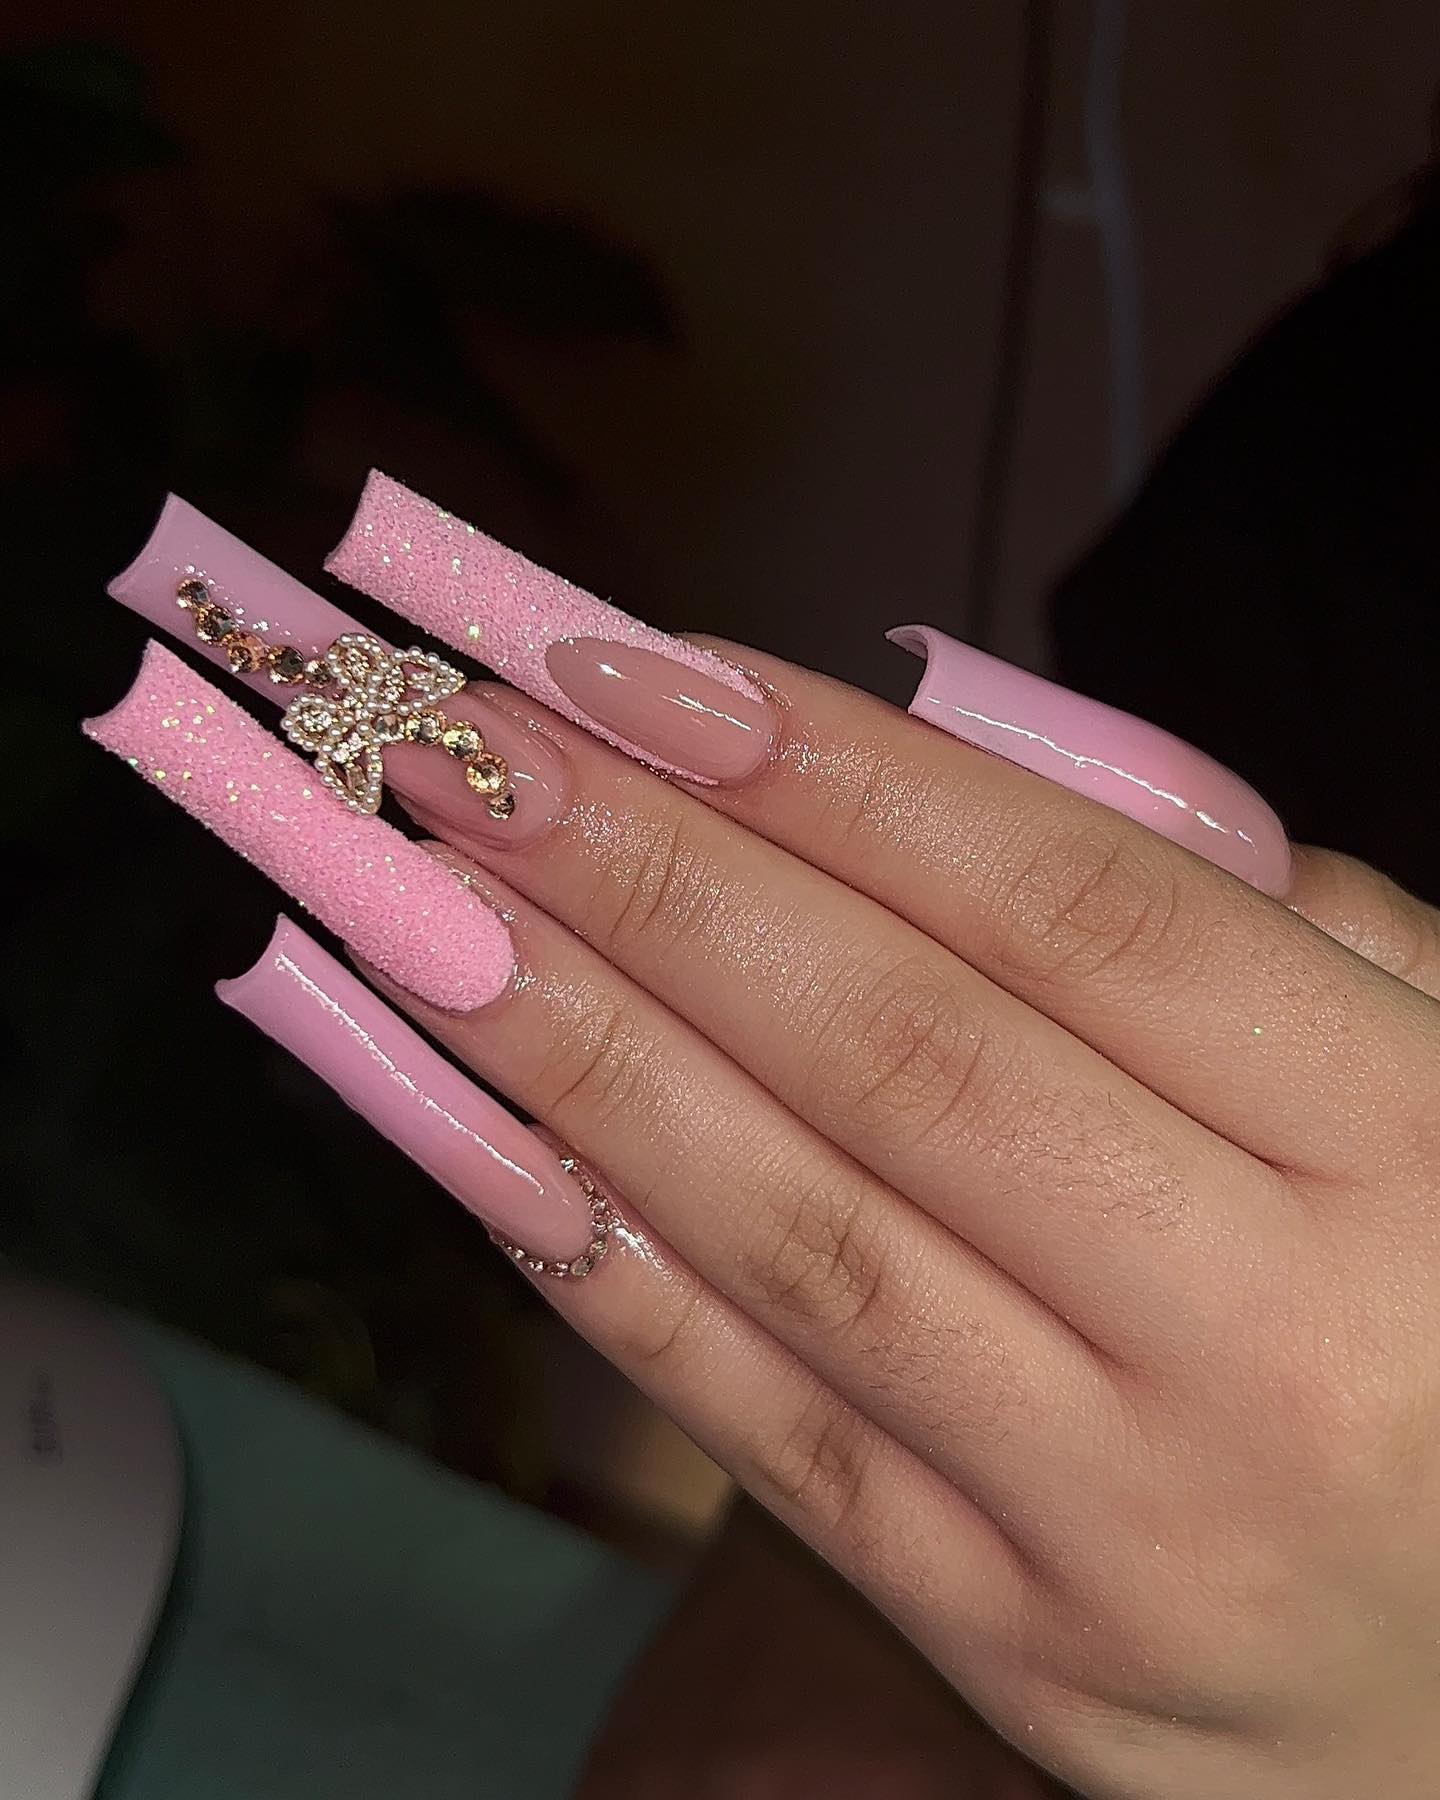 Acrylic pink nails and this extreme length will suit women who can handle the boldness of it all!